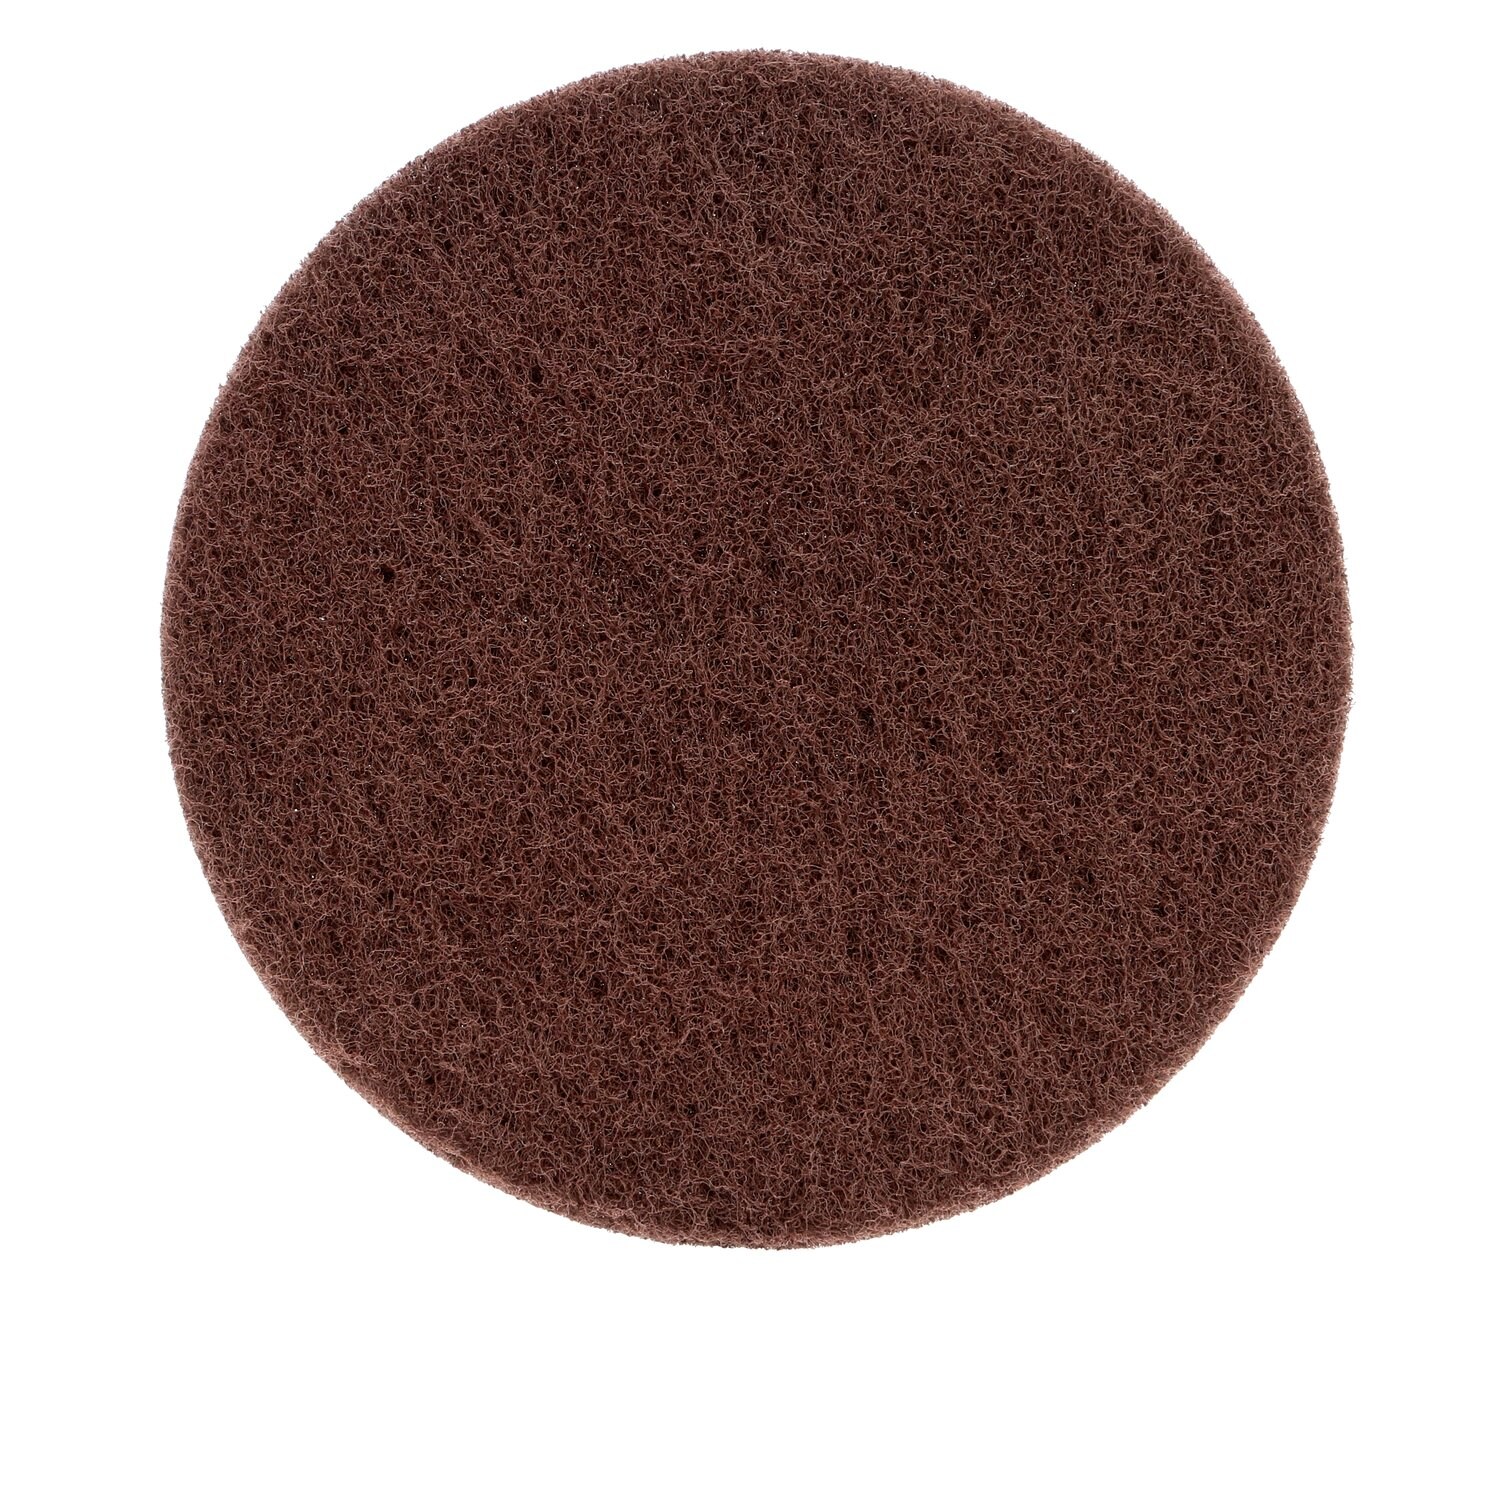 7000046843 - Standard Abrasives Buff and Blend Hook and Loop GP Vacuum Disc, 831708,
6 in A VFN, 10/Pac, 100 ea/Case